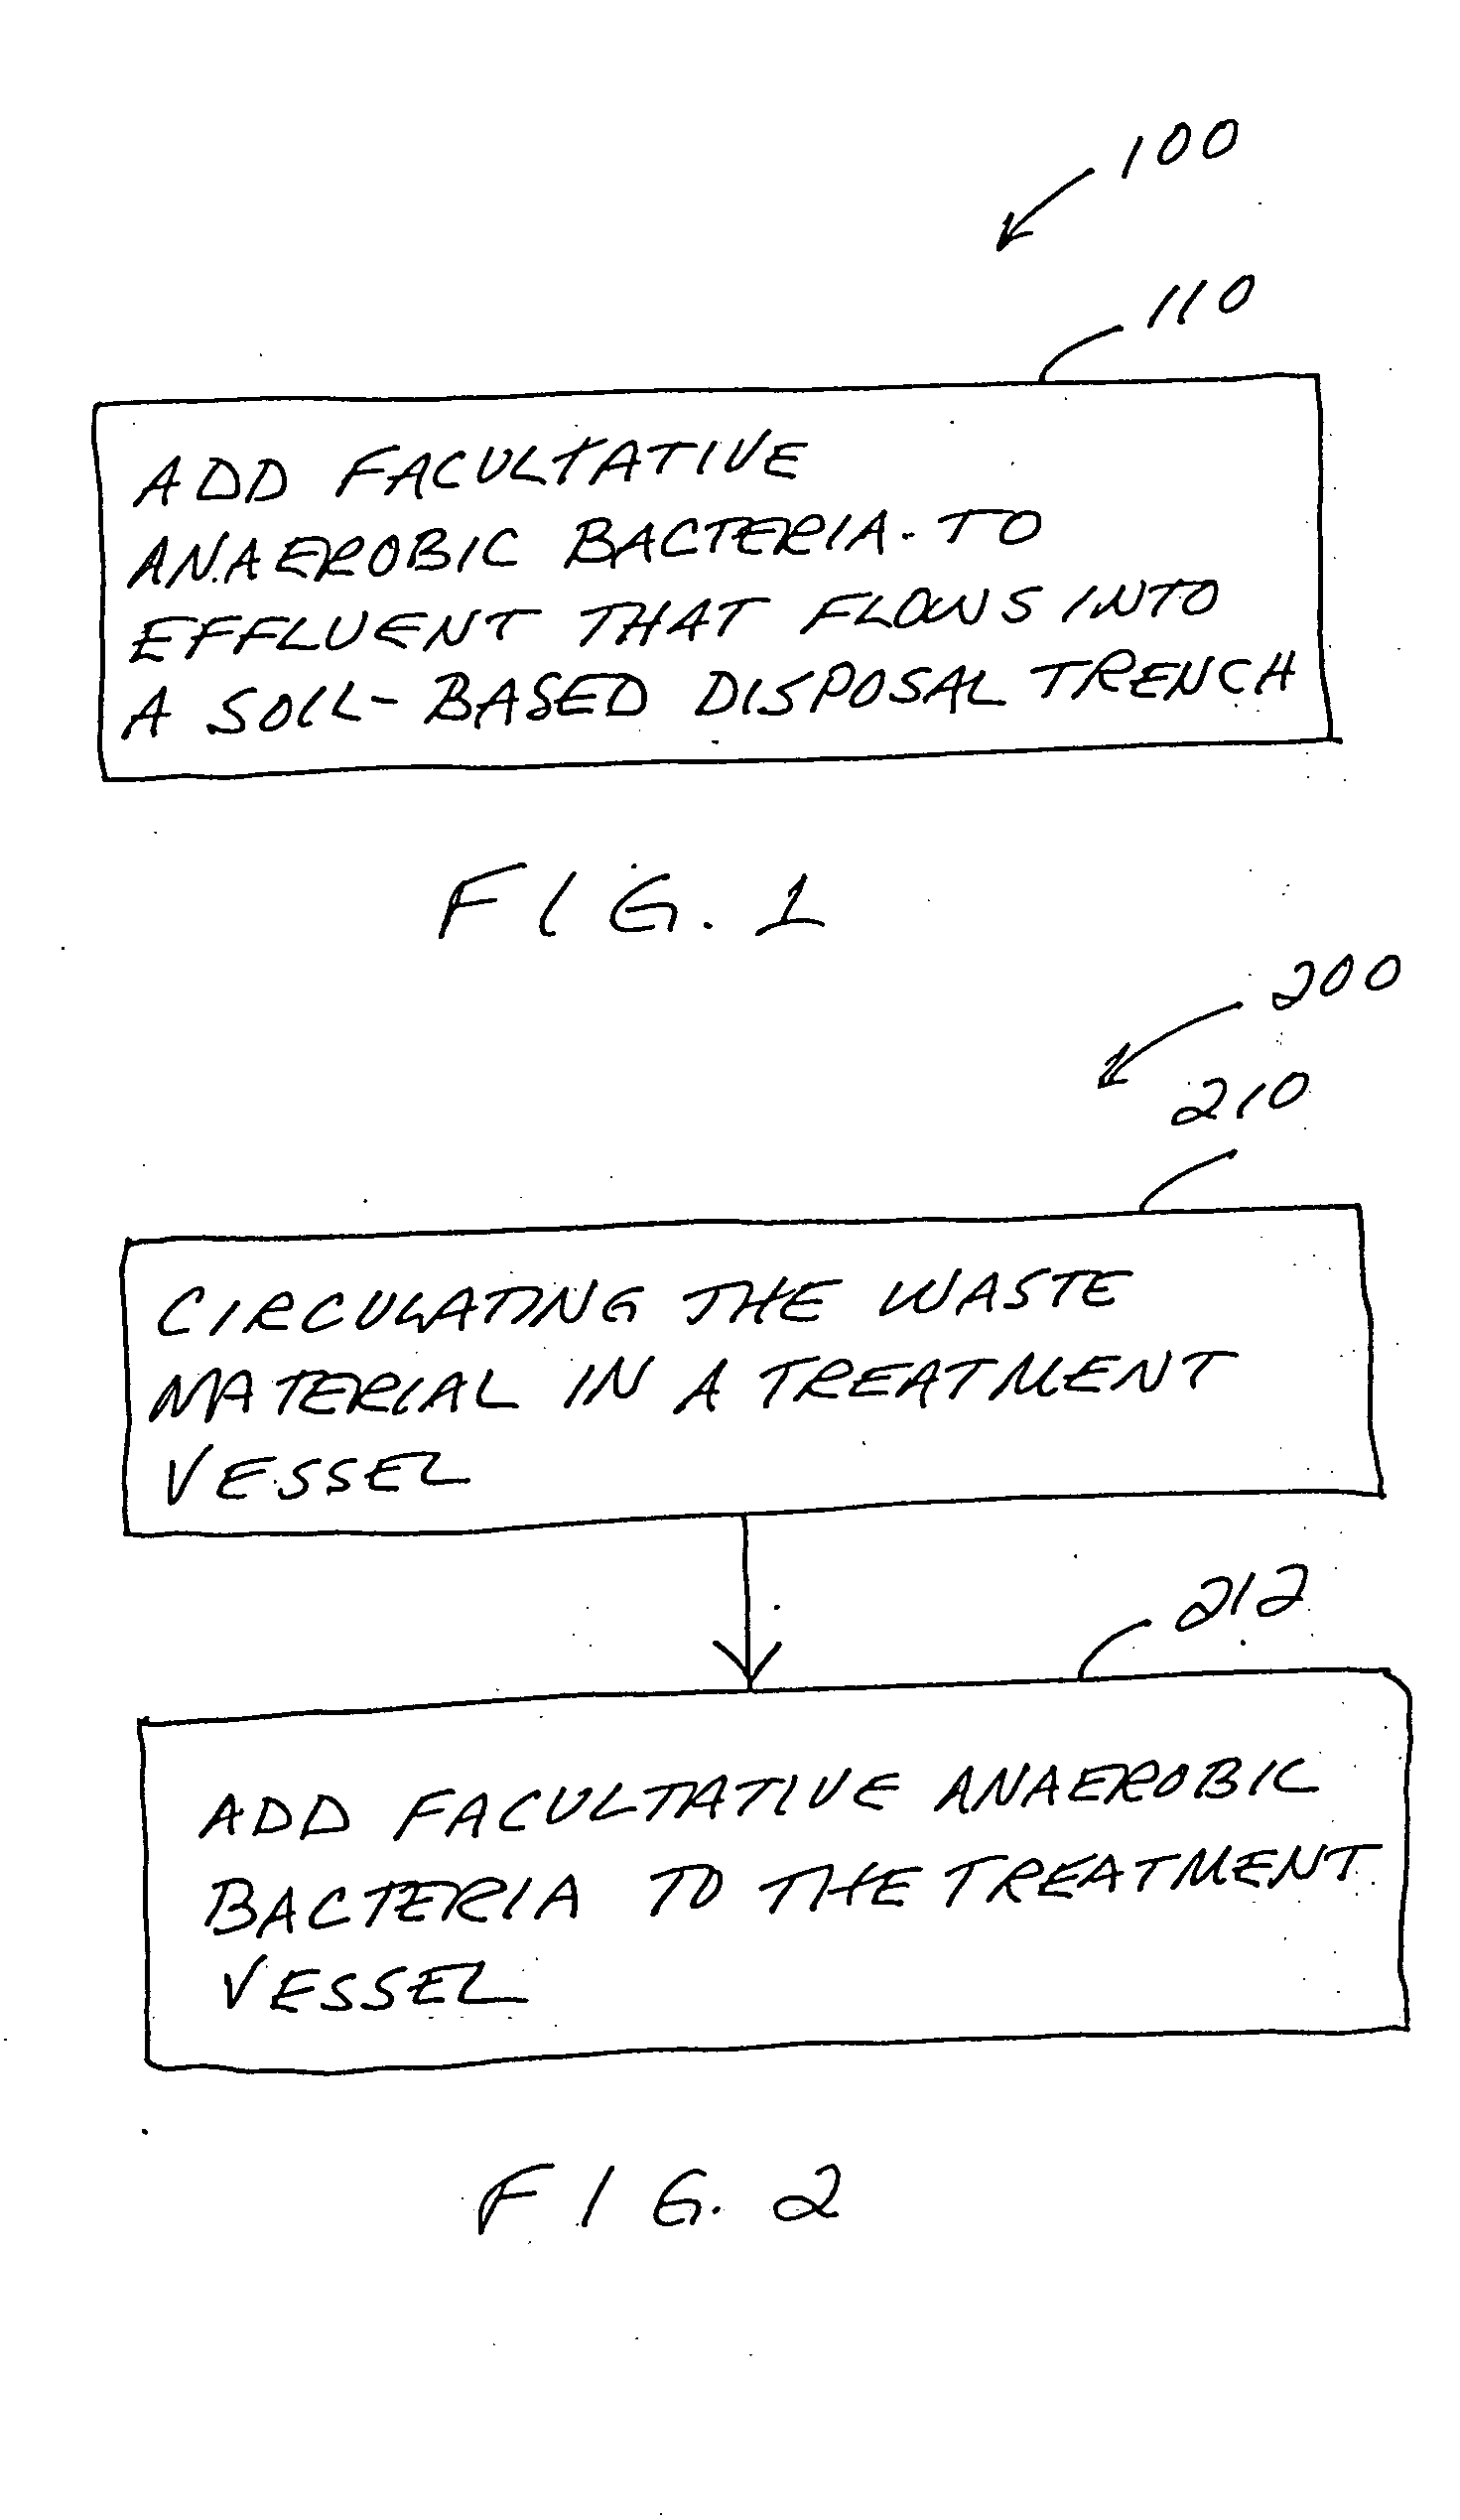 Method for recovering a disposal trench with a biomat slime, and method for operating a waste treatment vessel